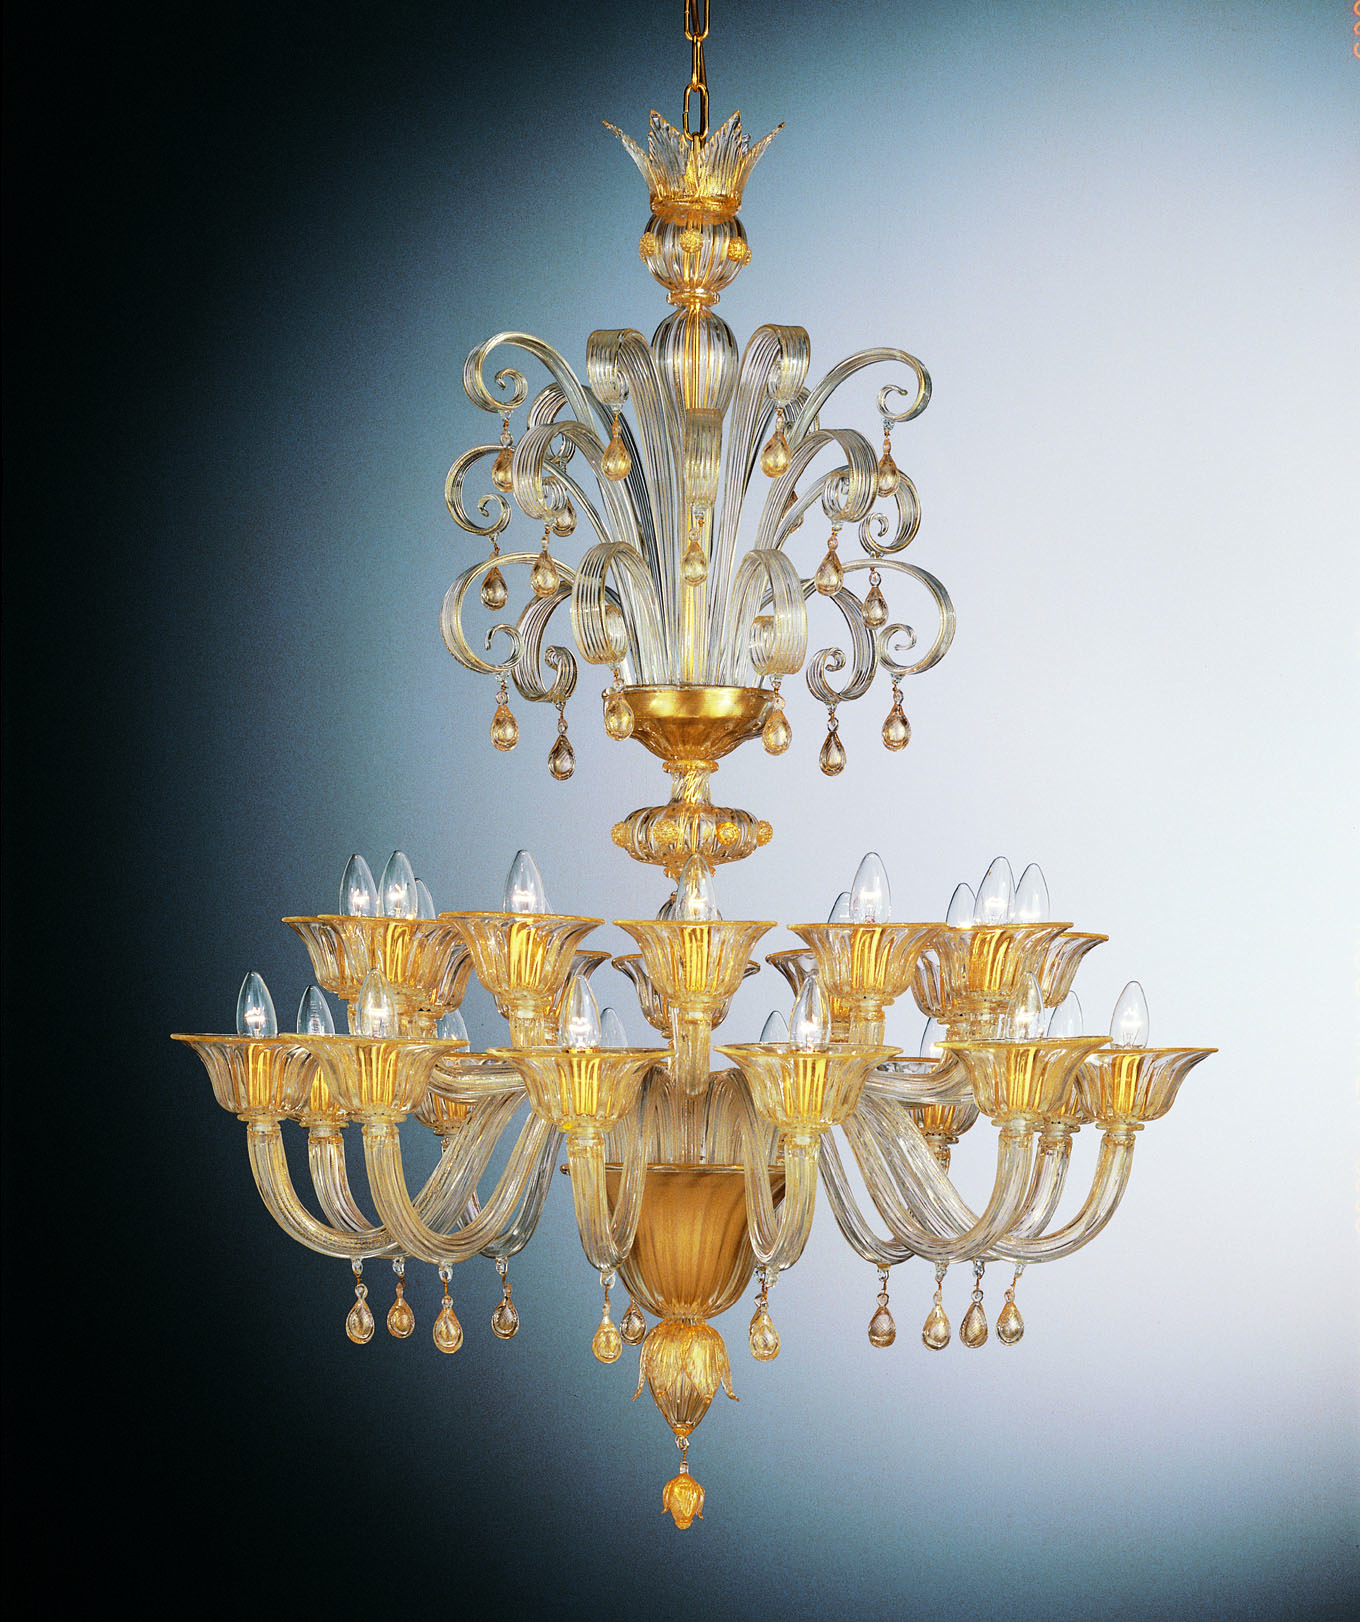 Crystal Gold Leaf Murano Chandelier “Palace” With 24 Lights